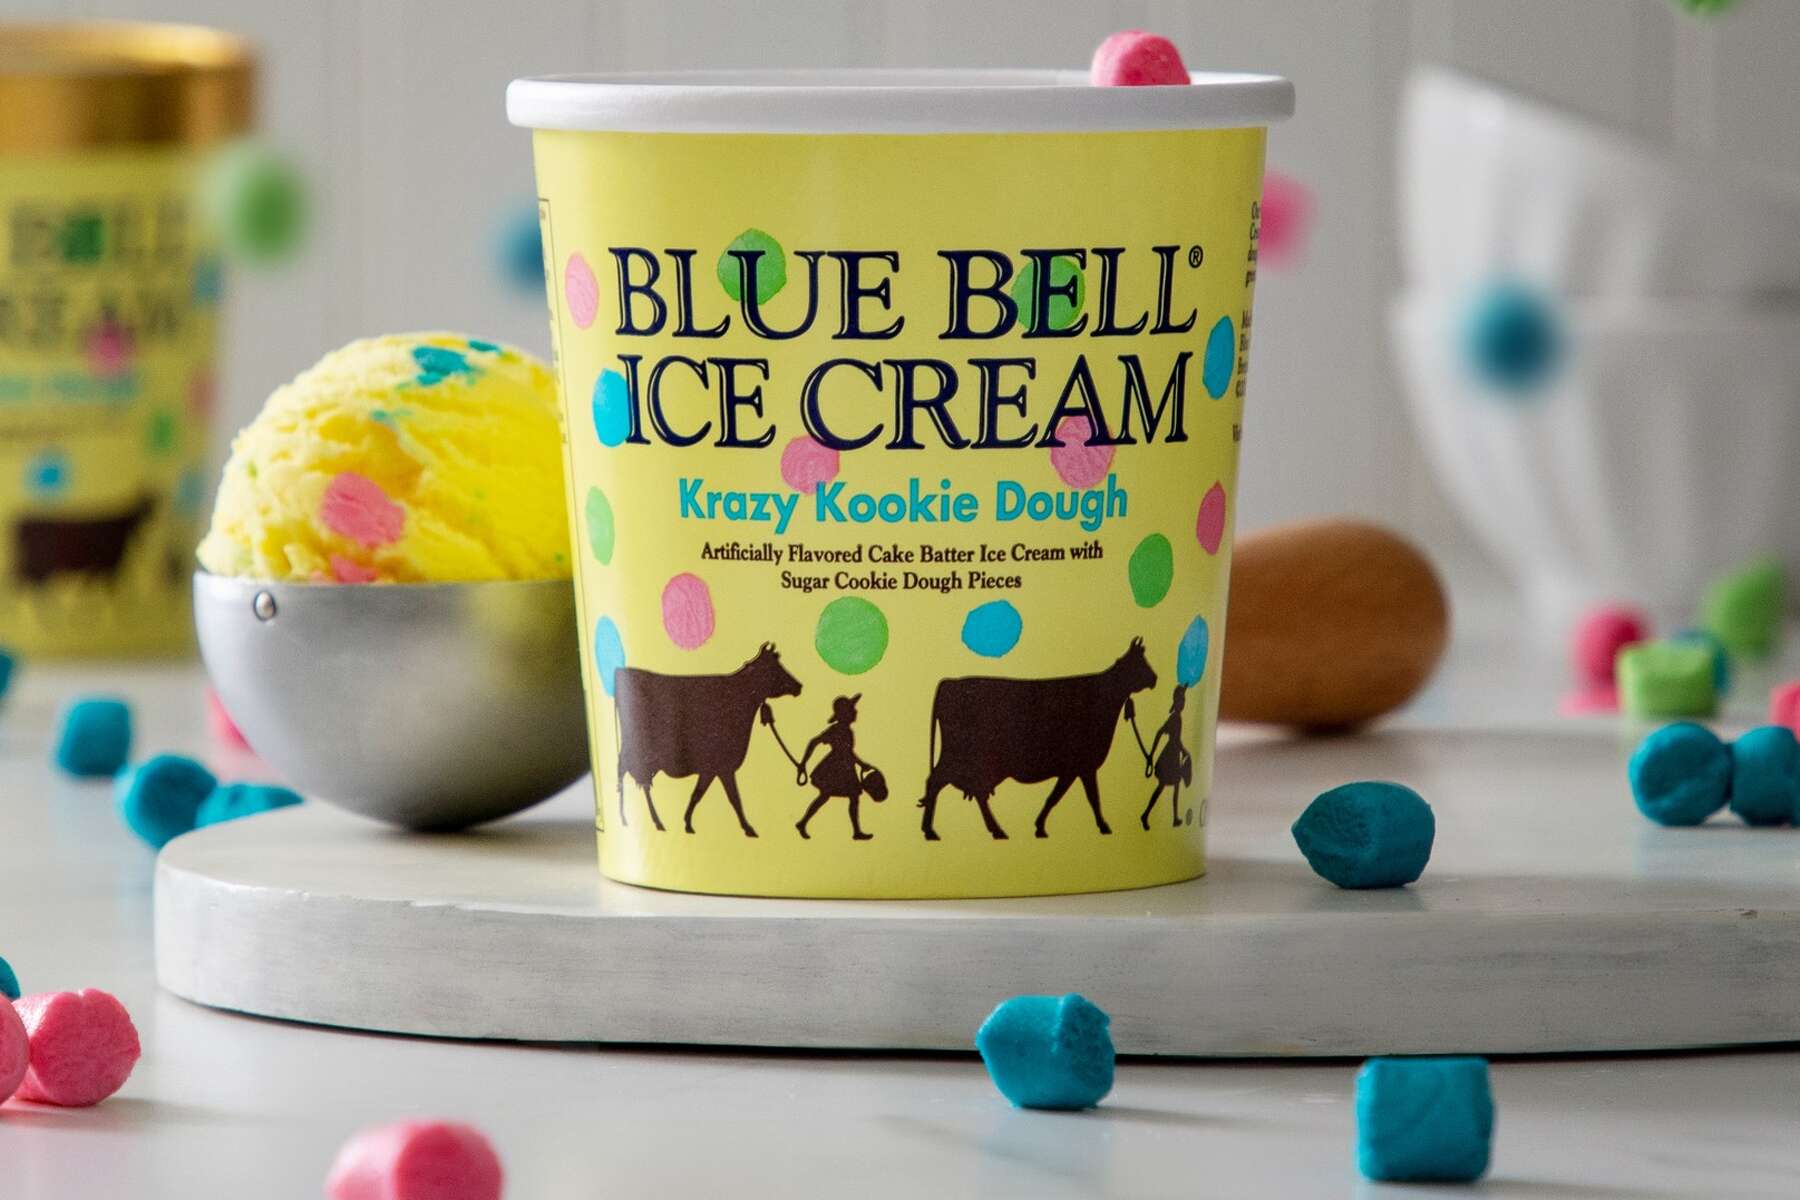 Rouses Markets - Get ready to walk down your local Rouses aisle....  Arriving TODAY Blue Bell Ice Cream BRIDE'S CAKE and GROOM'S CAKE for a  limited time. 💍💐🍨 Bride's Cake (new flavor) -